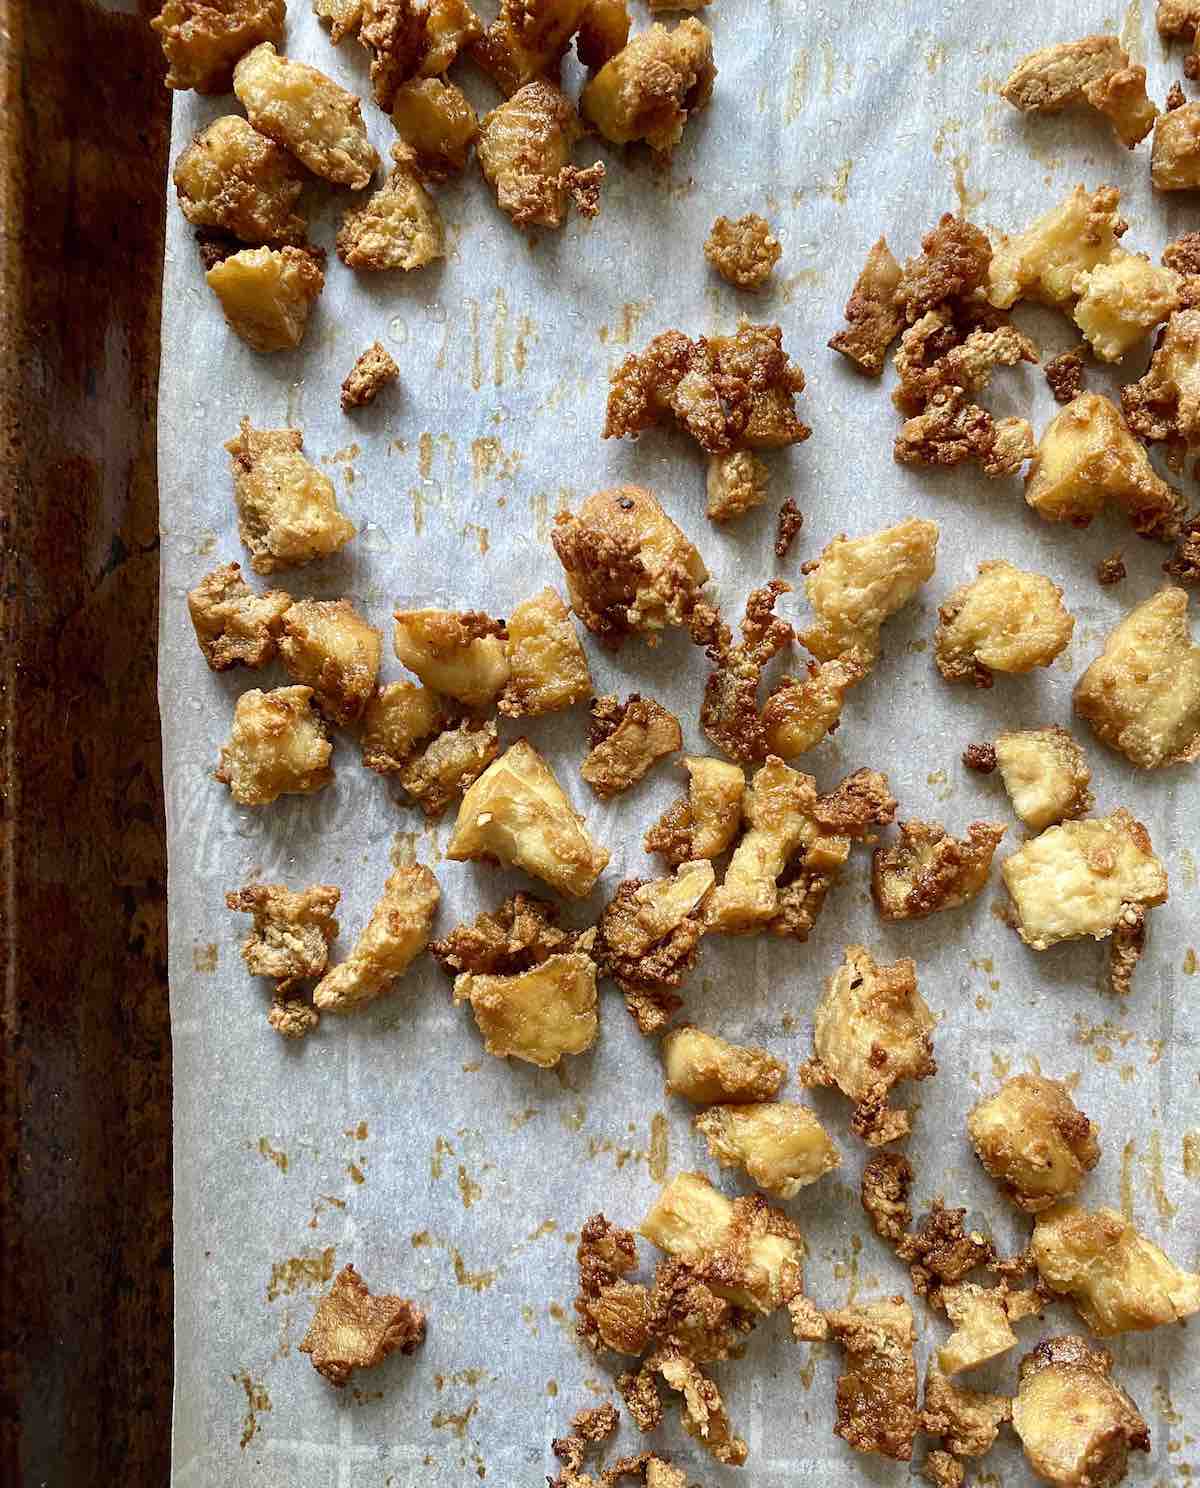 Crispy baked tofu pieces on a baking sheet lined with parchment paper.